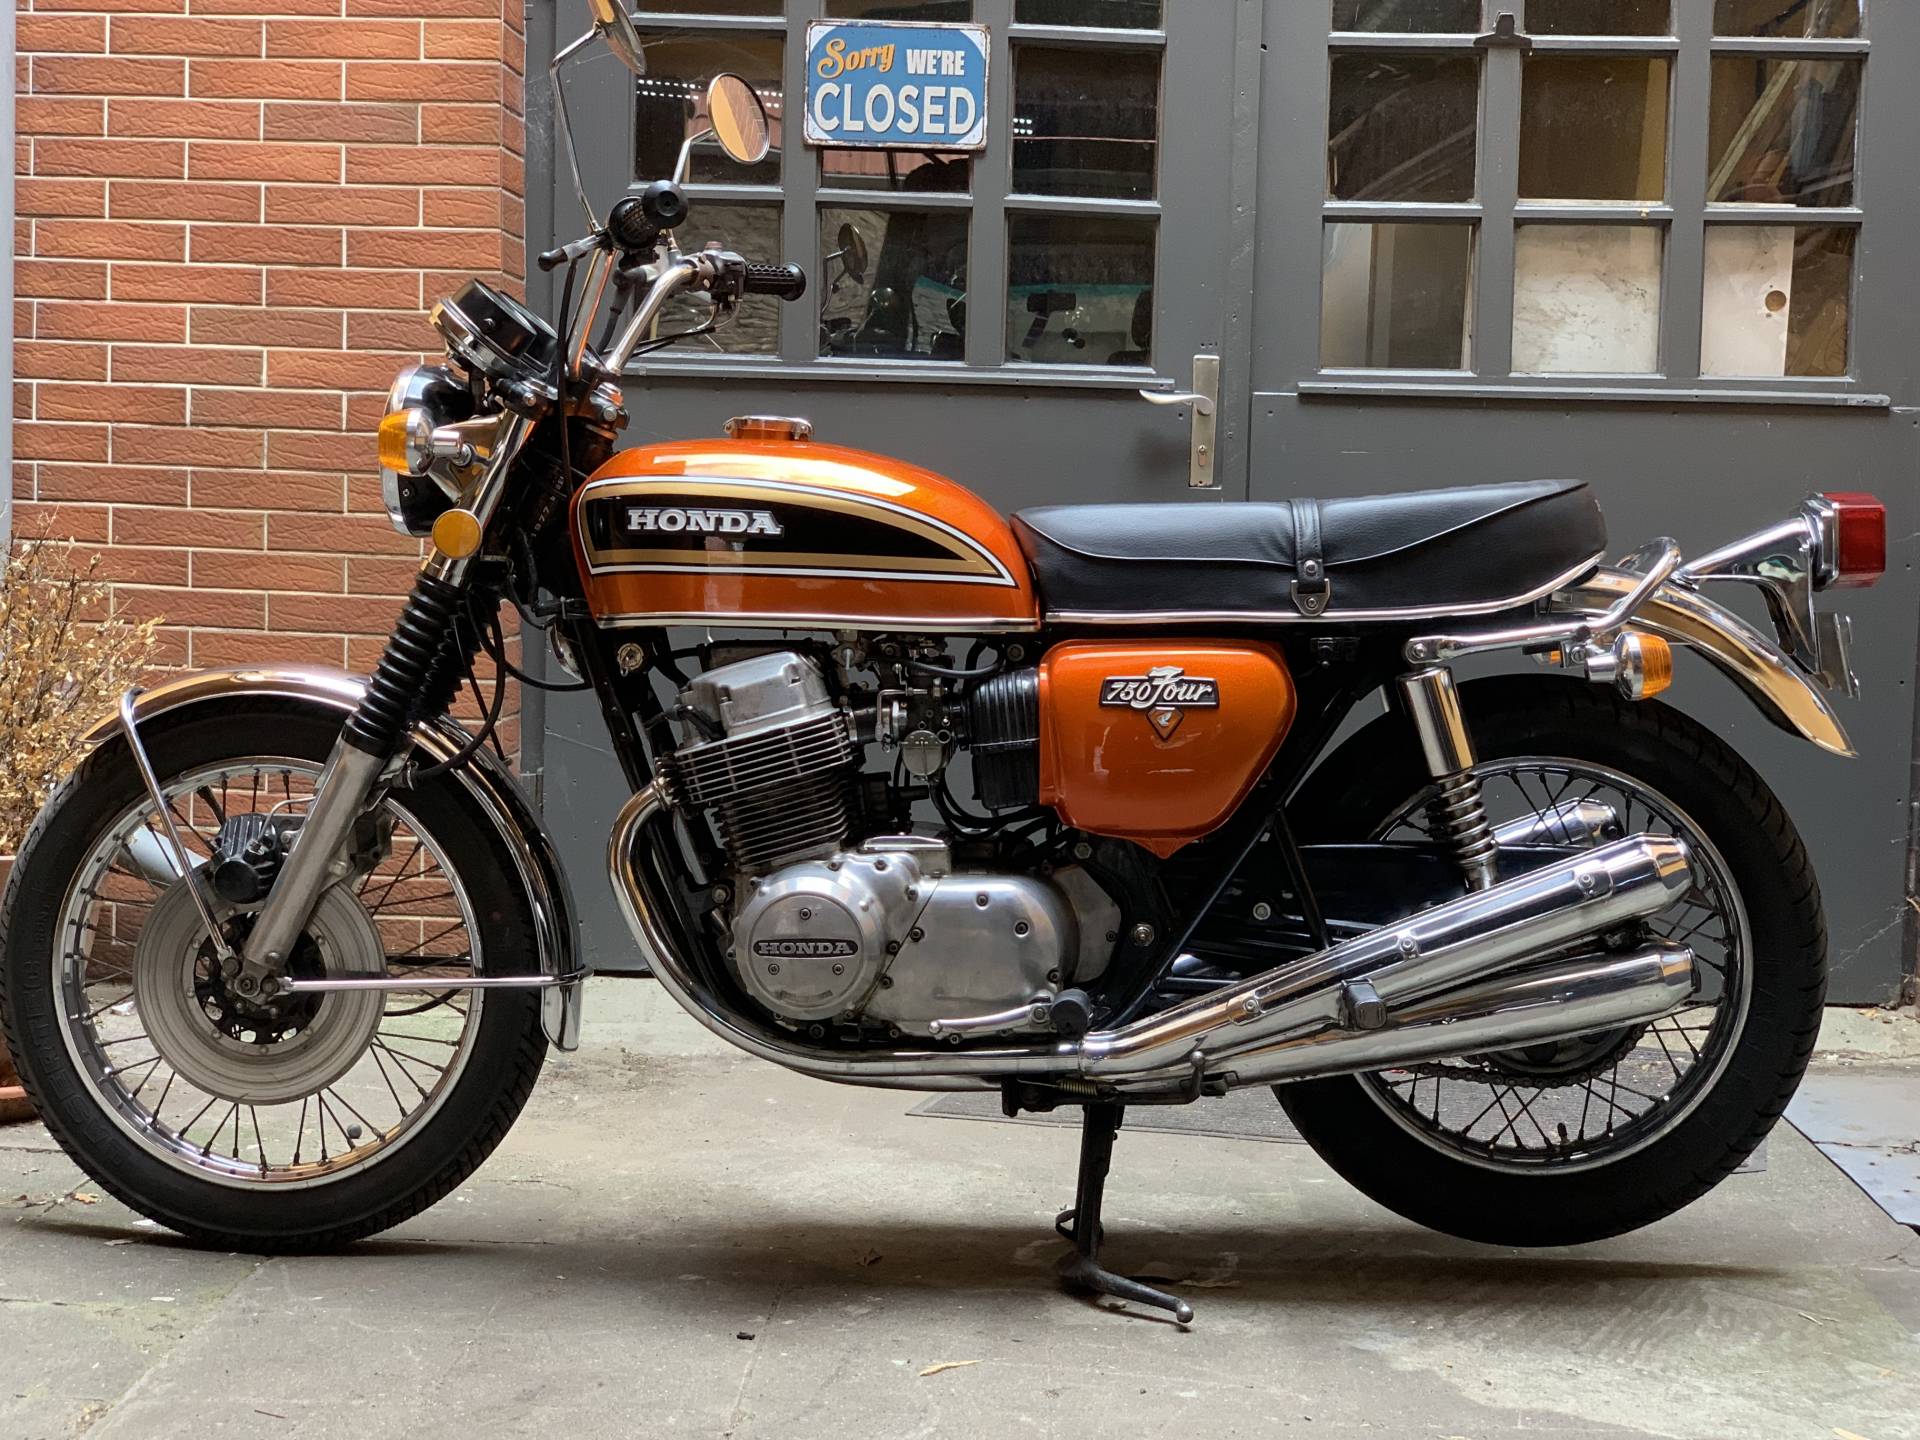 For Sale: Honda CB 750 Four (1977) offered for AUD 12,383